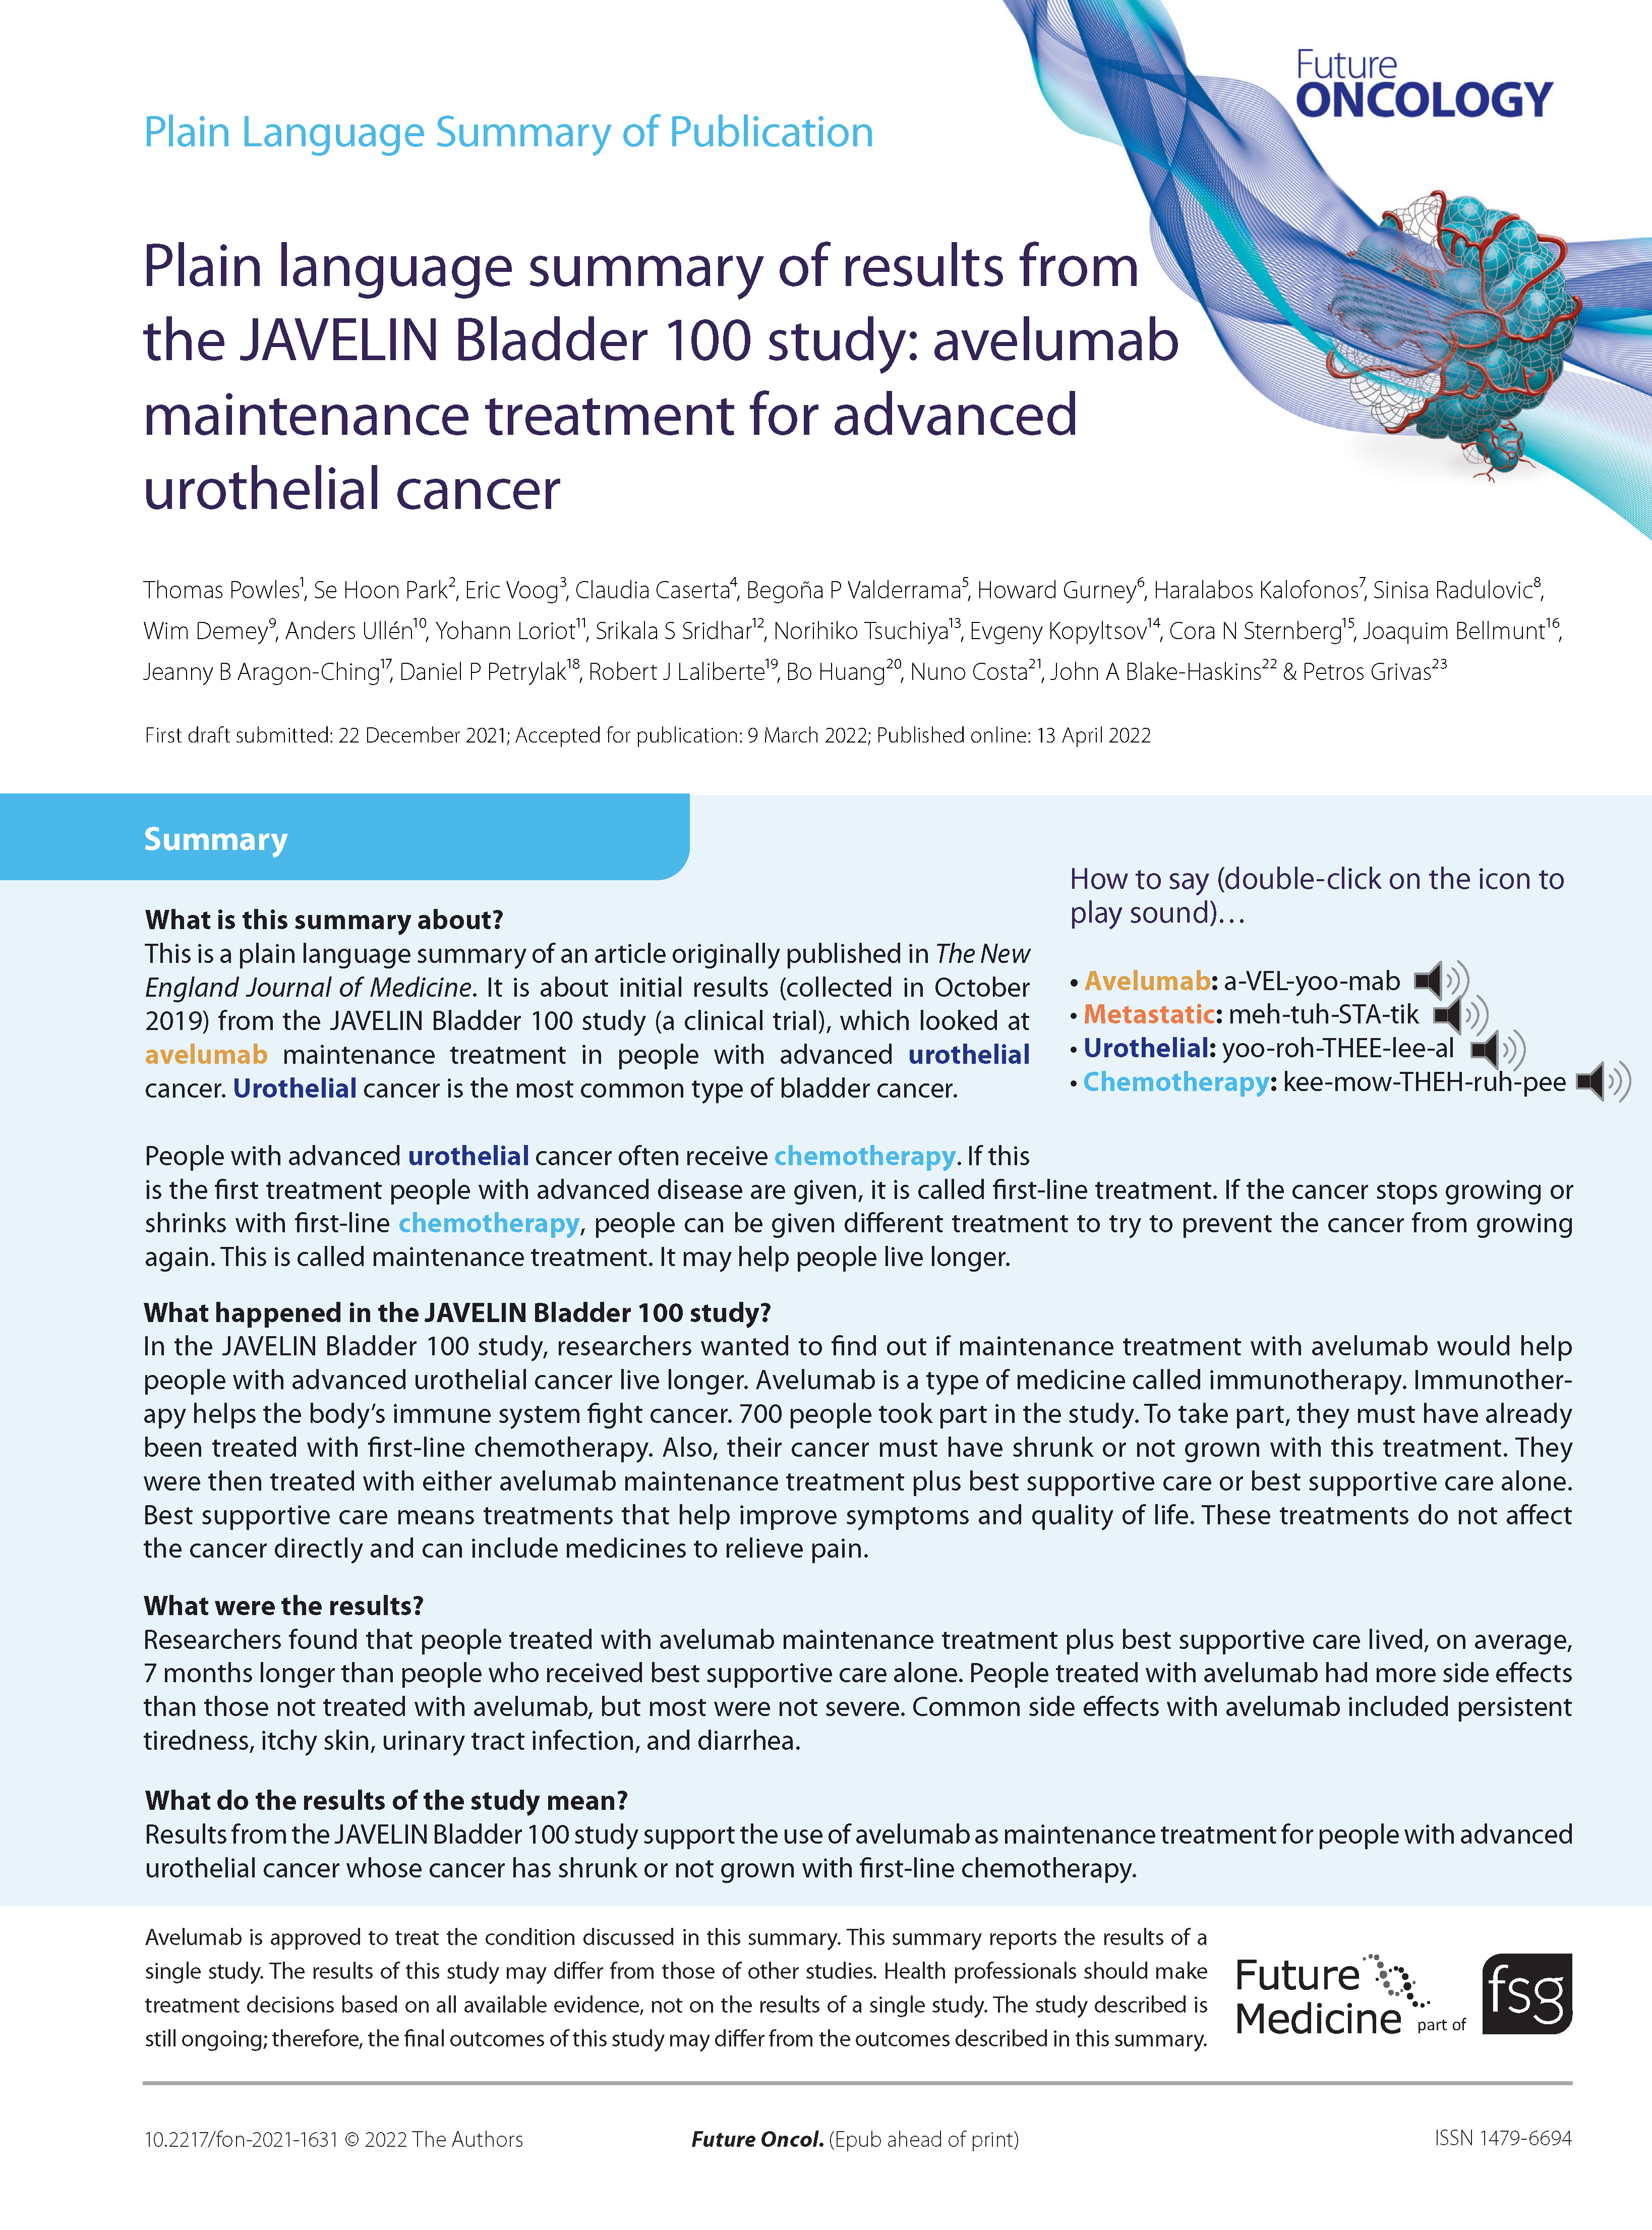 Plain language summary of results from the JAVELIN Bladder 100 study: avelumab maintenance treatment for advanced urothelial cancer